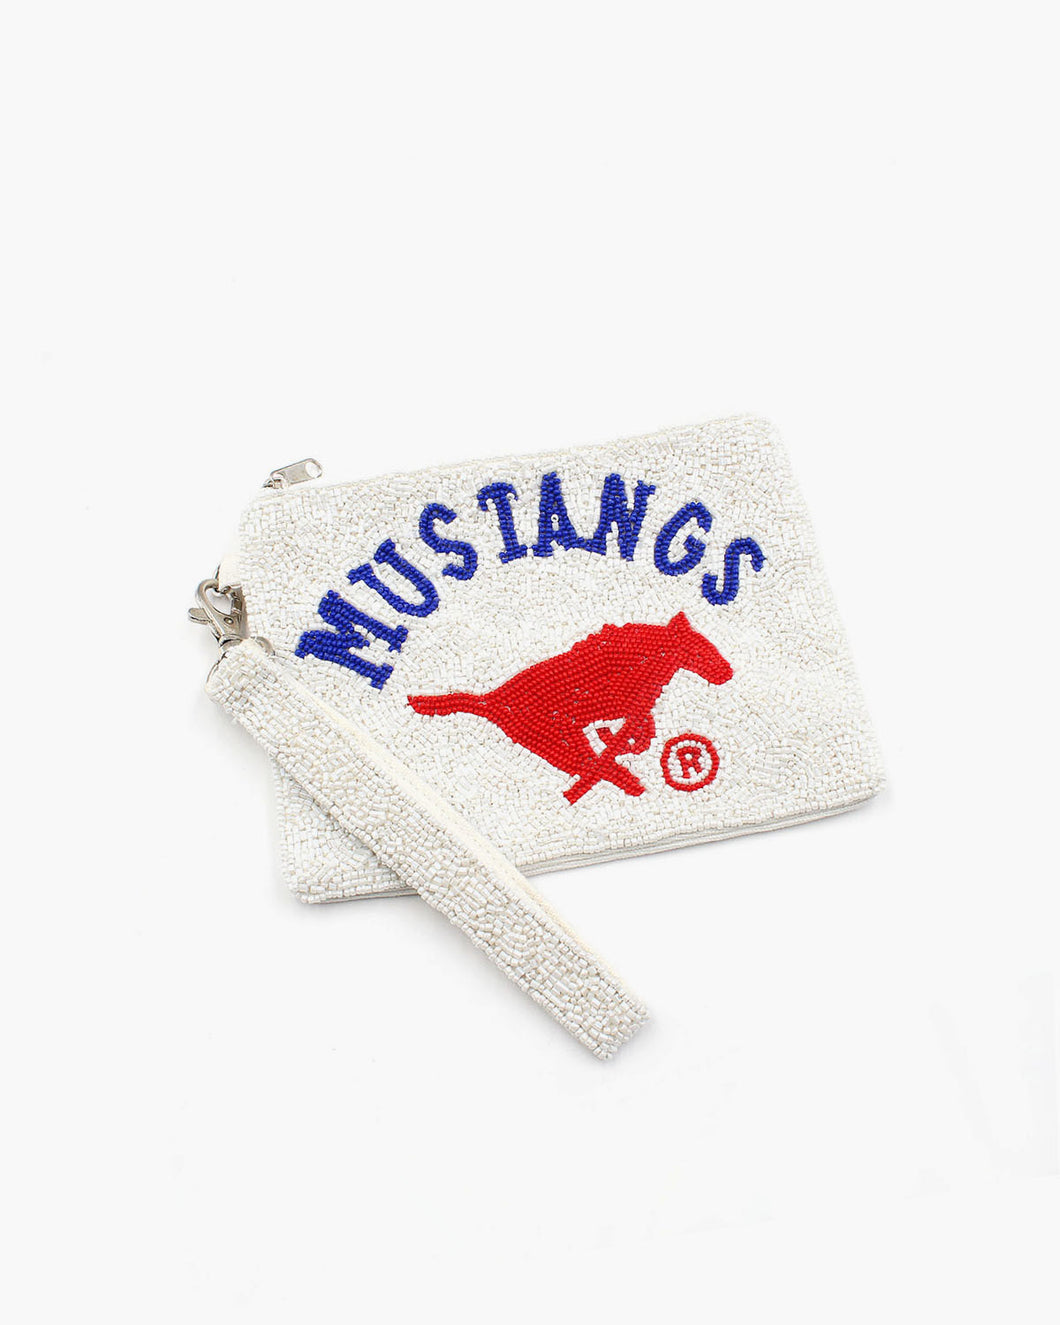 SMU Mustang Beaded Pouch